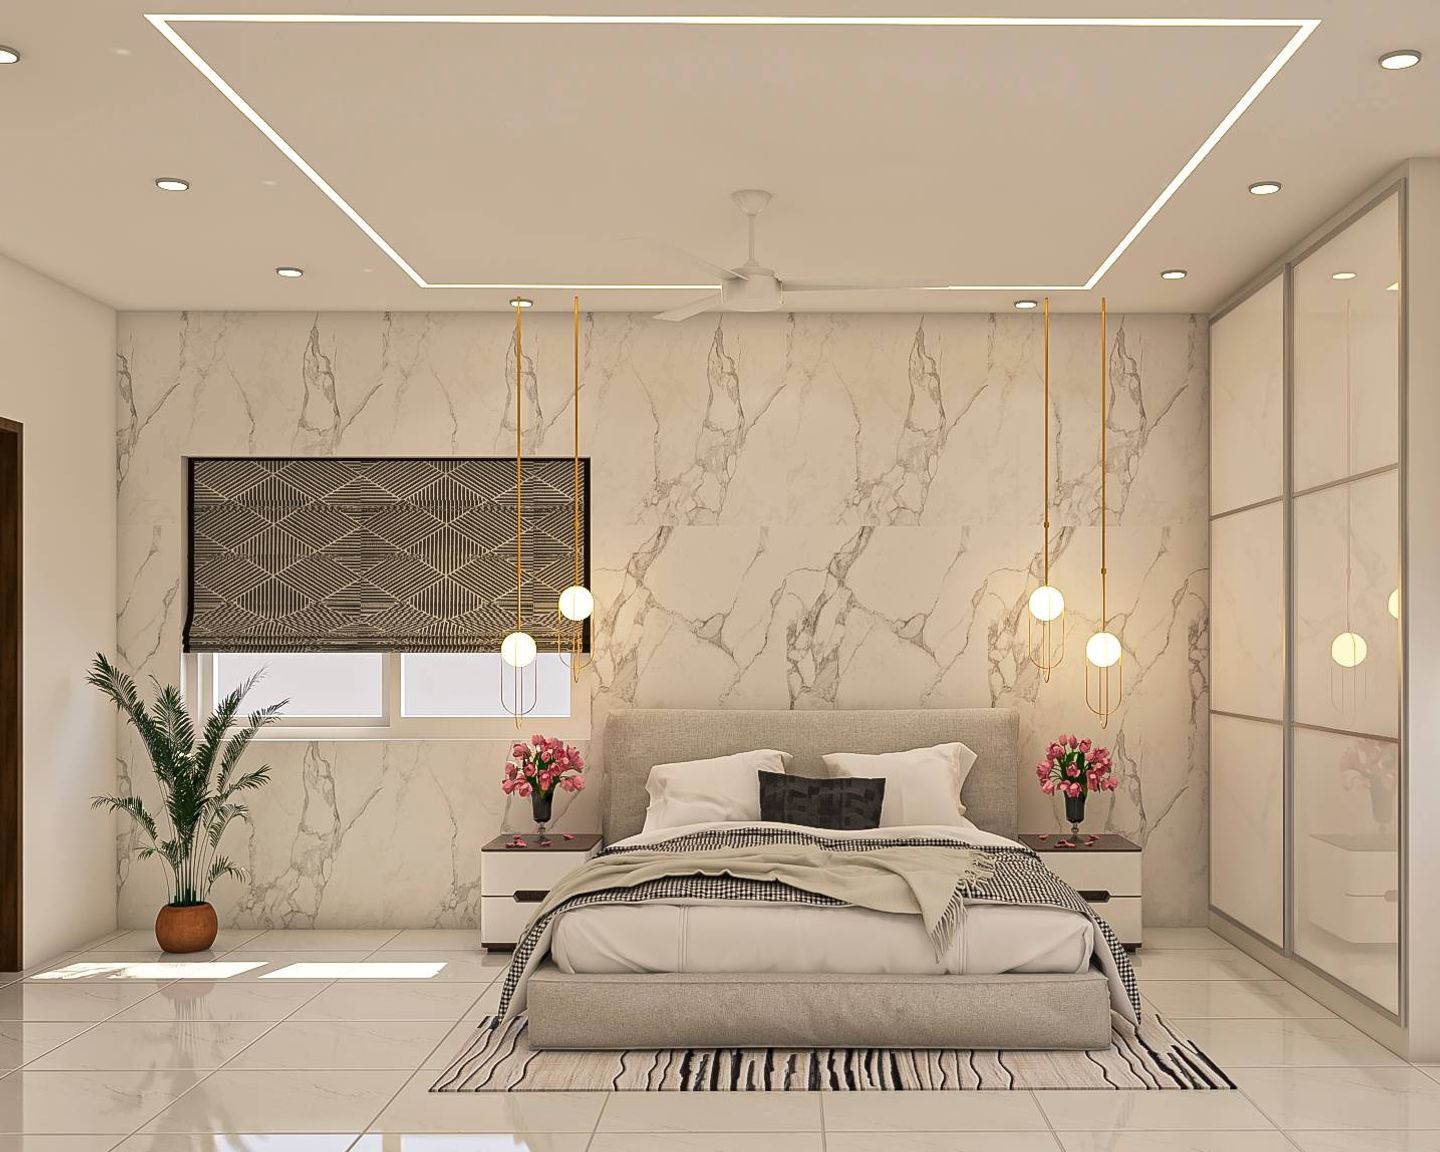 Gypsum Single-Layered Bedroom False Ceiling Design With Recessed Lights - Livspace